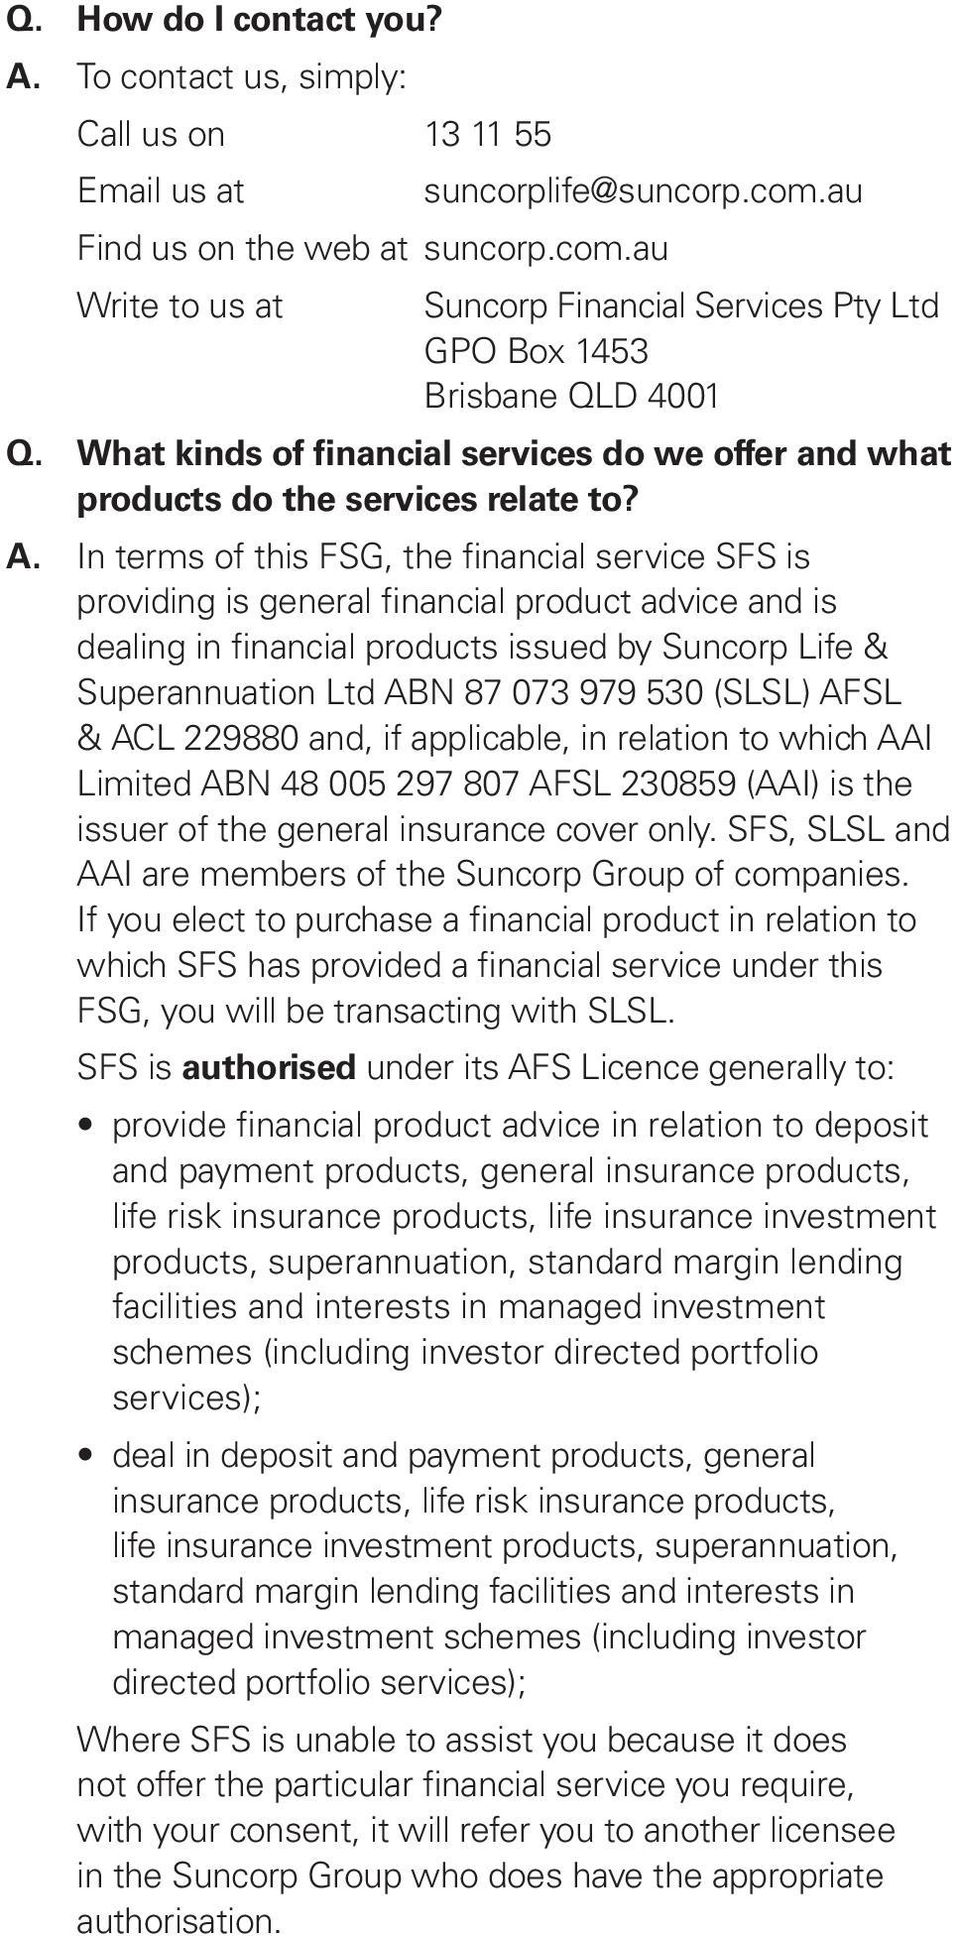 In terms of this FSG, the financial service SFS is providing is general financial product advice and is dealing in financial products issued by Suncorp Life & Superannuation Ltd ABN 87 073 979 530